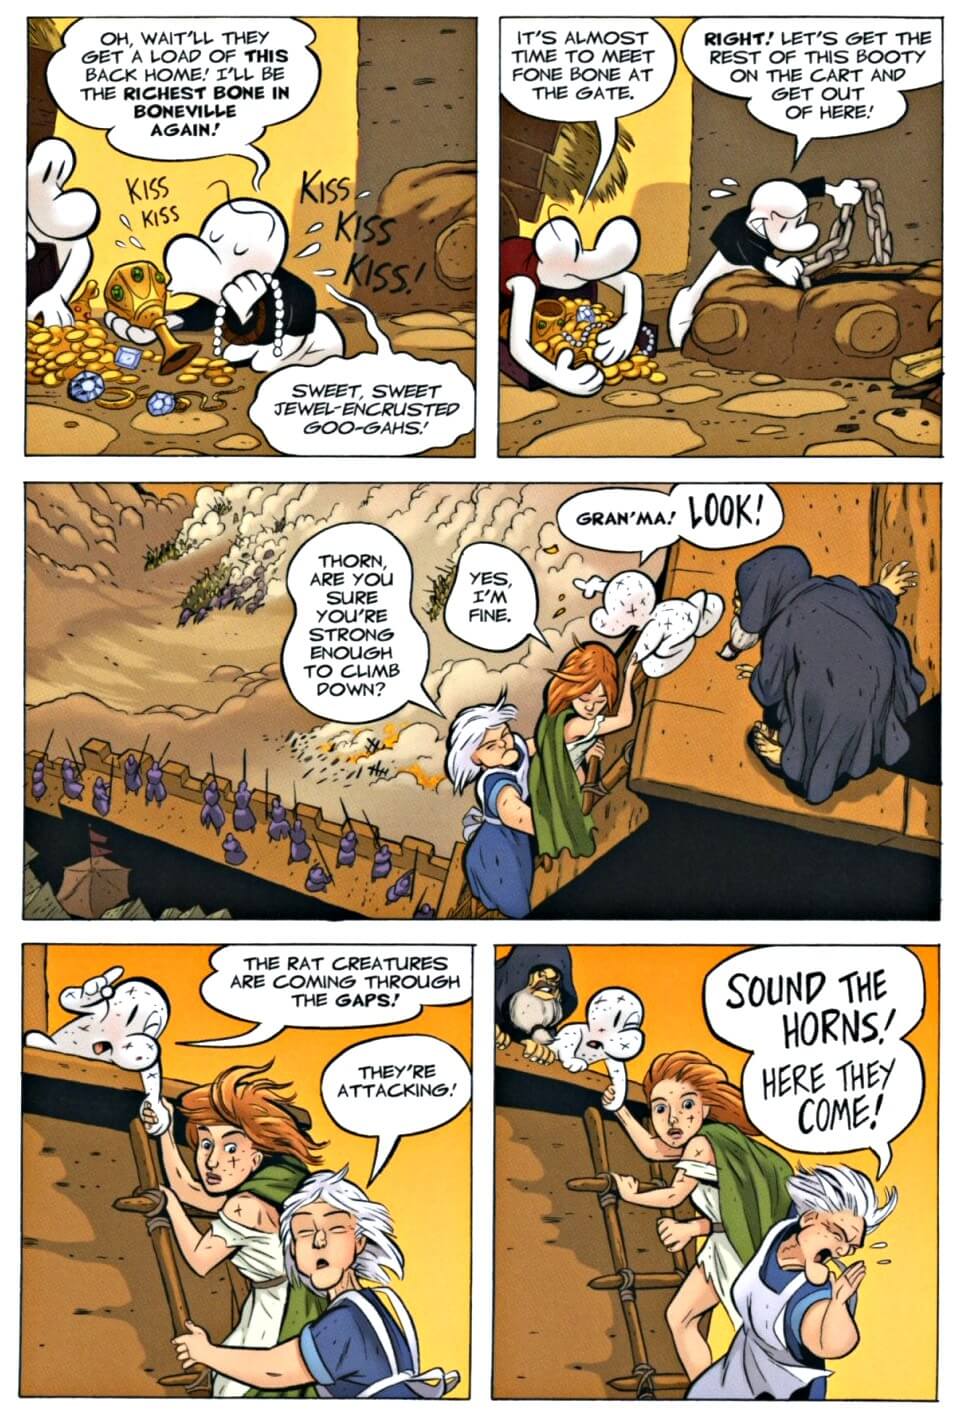 page 73 chapter 3 of bone 9 crown of horns graphic novel